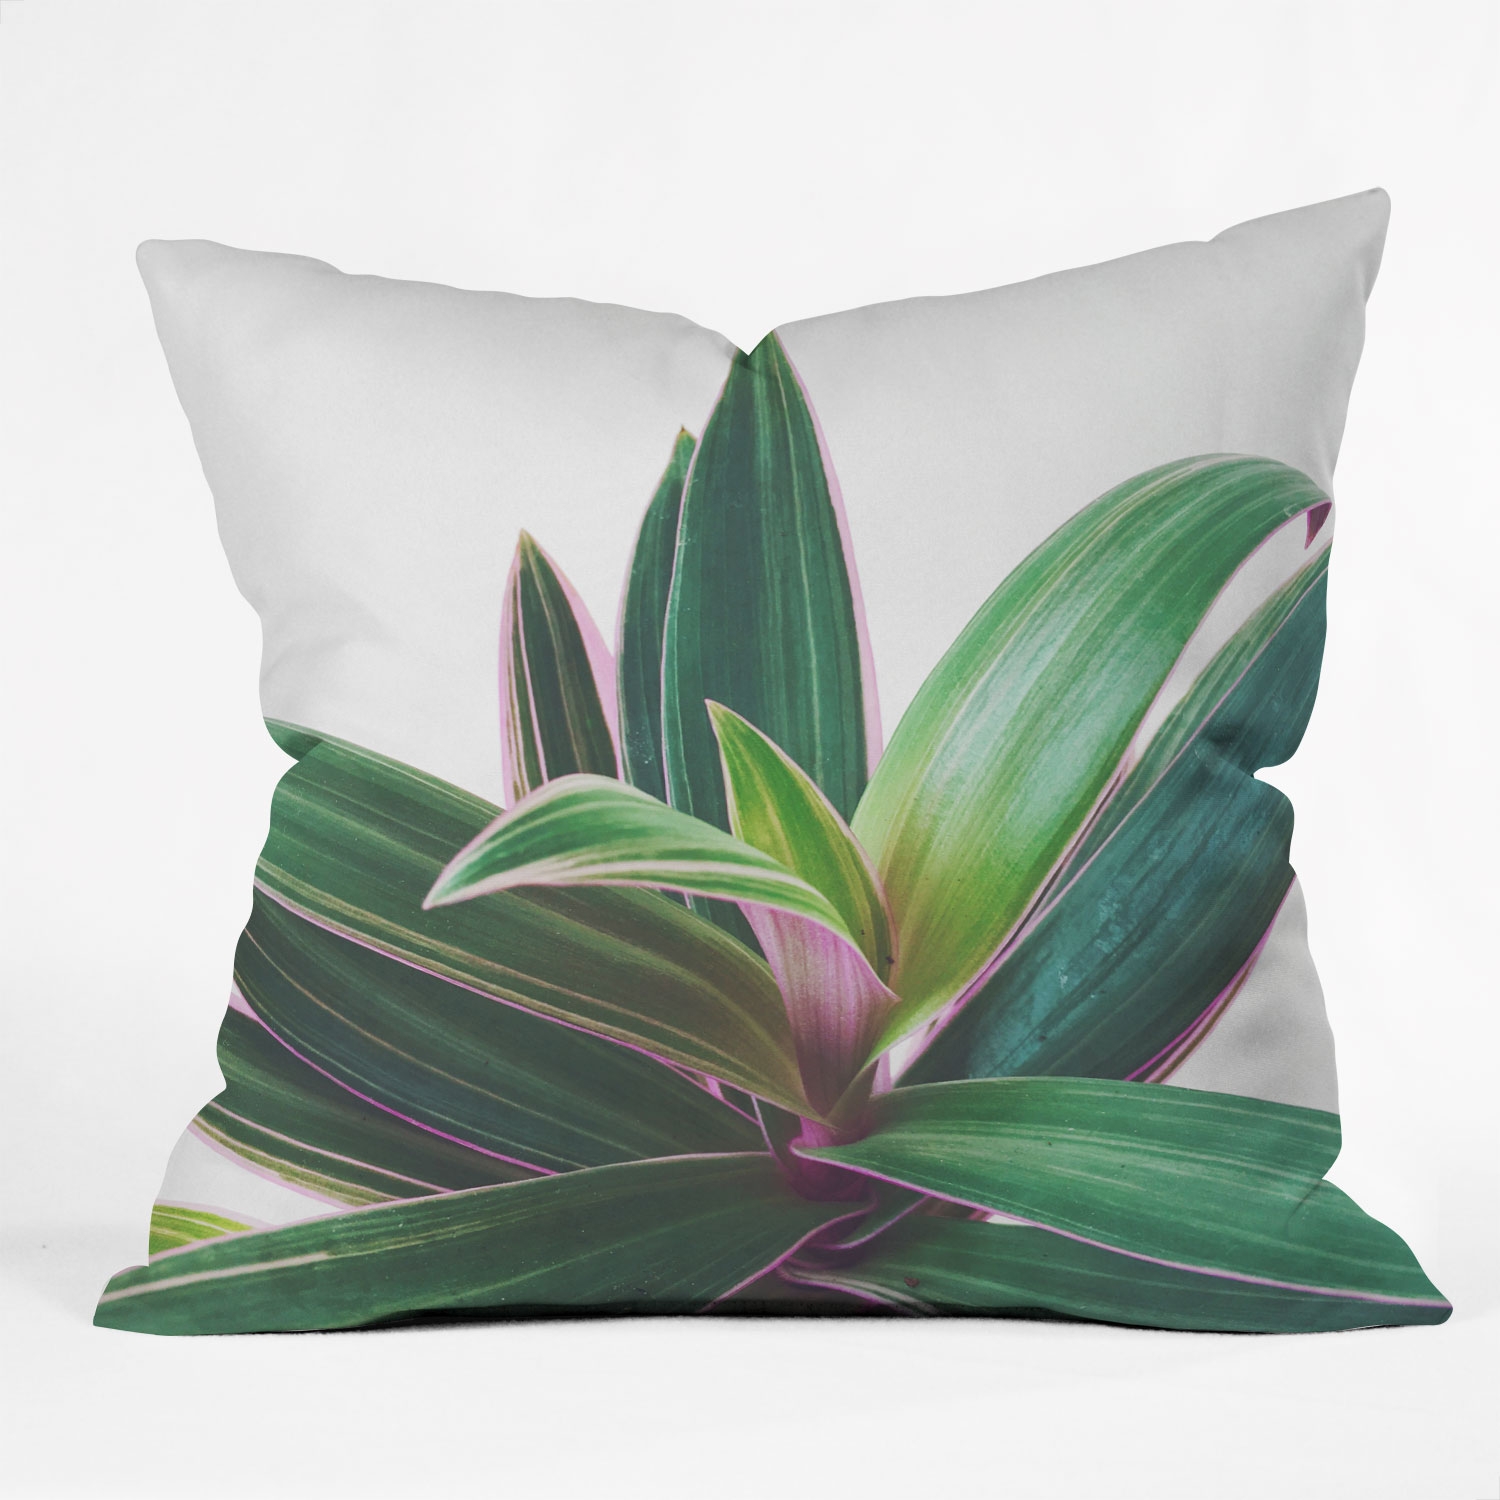 Oyster Plant by Cassia Beck - Outdoor Throw Pillow 26" x 26" - Image 1